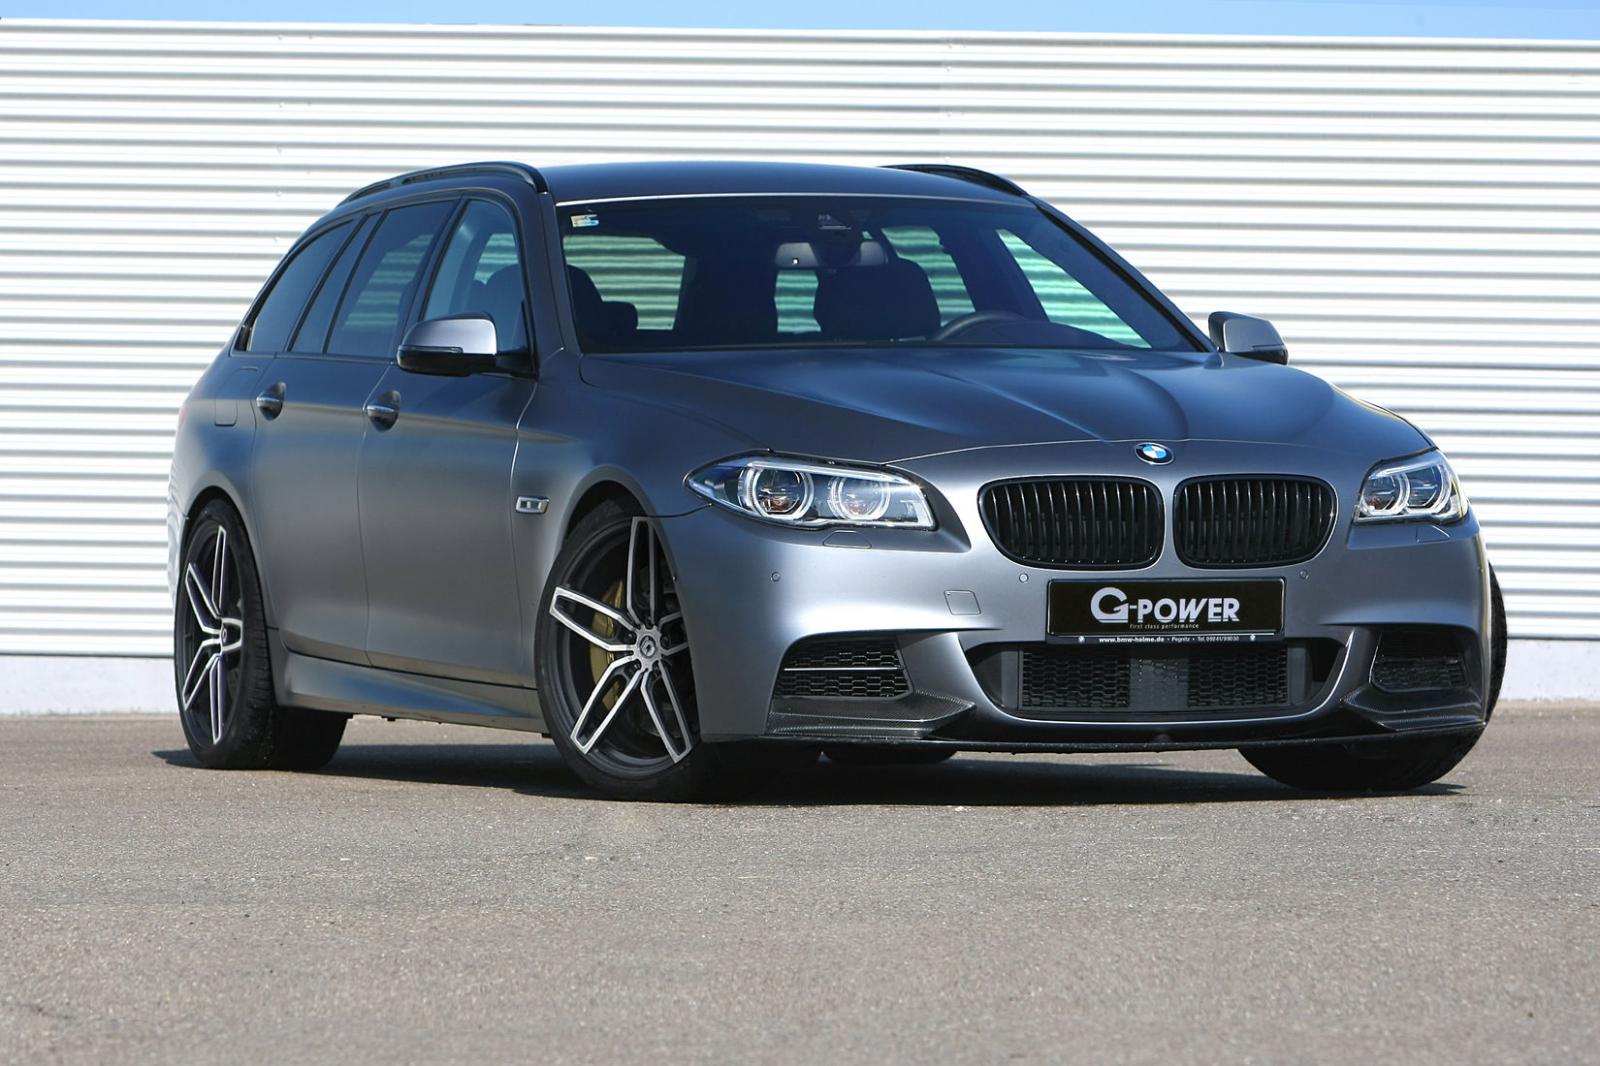 G Power S 435 Hp M550d Is The Fastest Diesel Touring Bmw In The World Theoretically Autoevolution